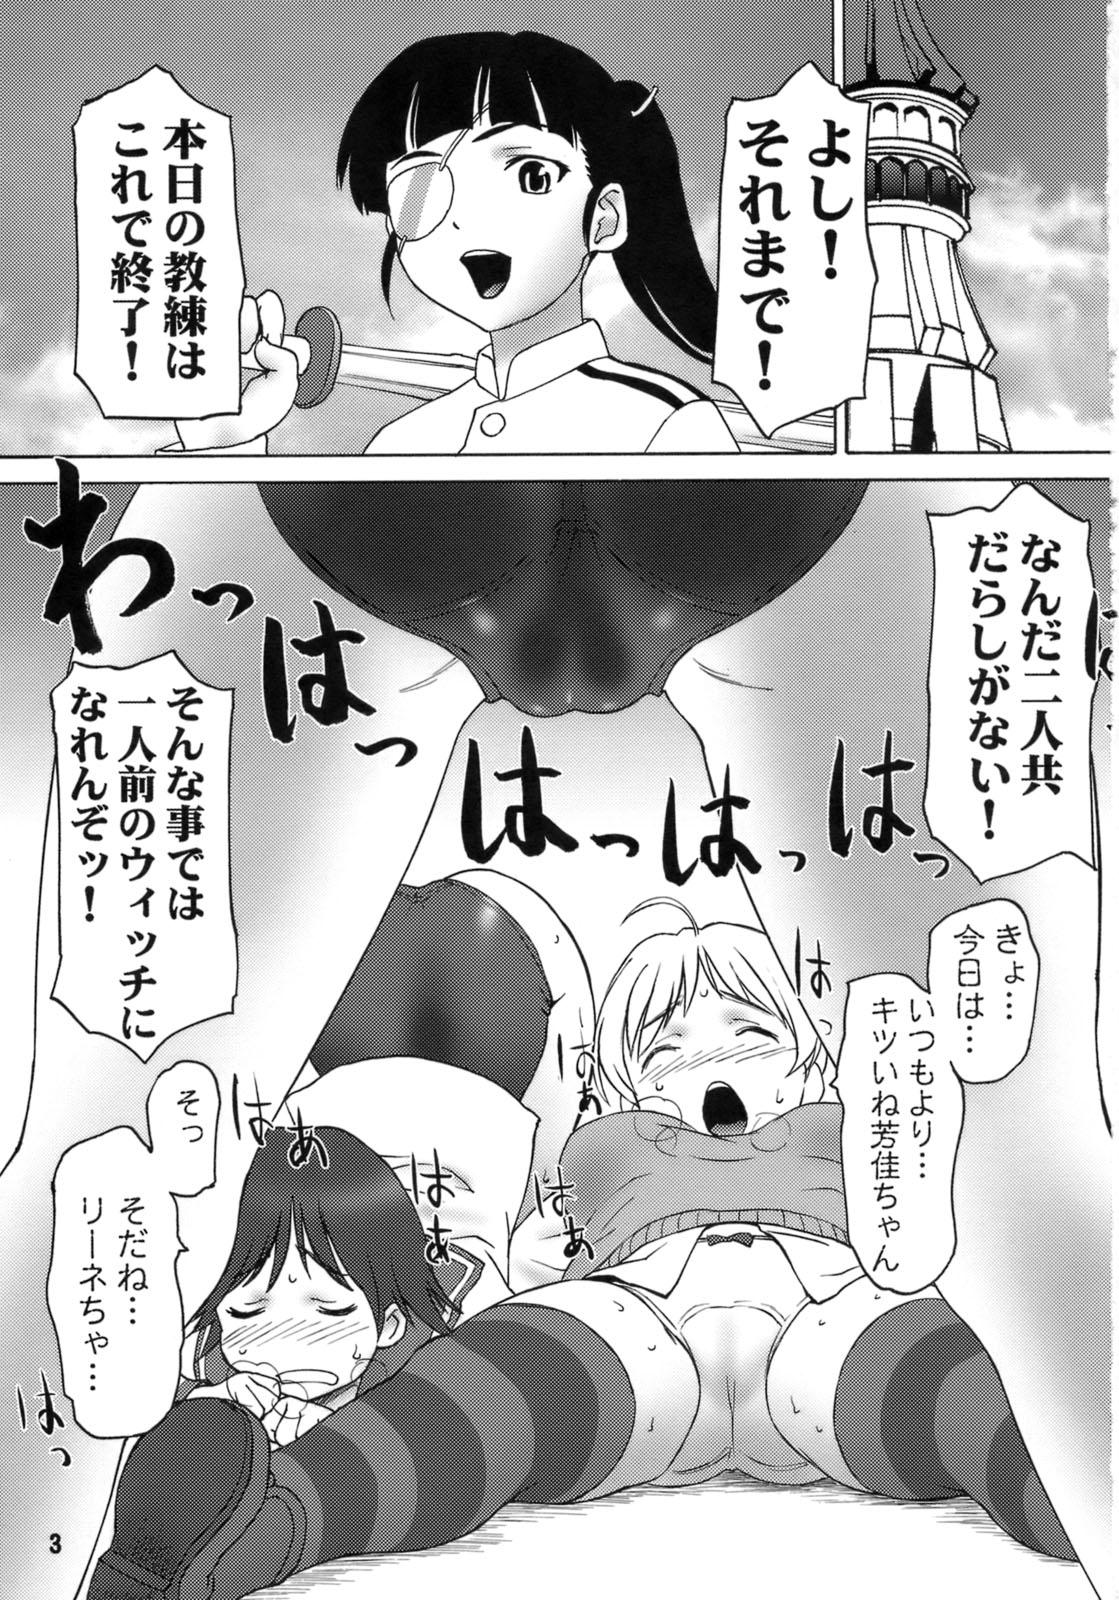 White Chick Steady - Strike witches Blow Job - Page 2